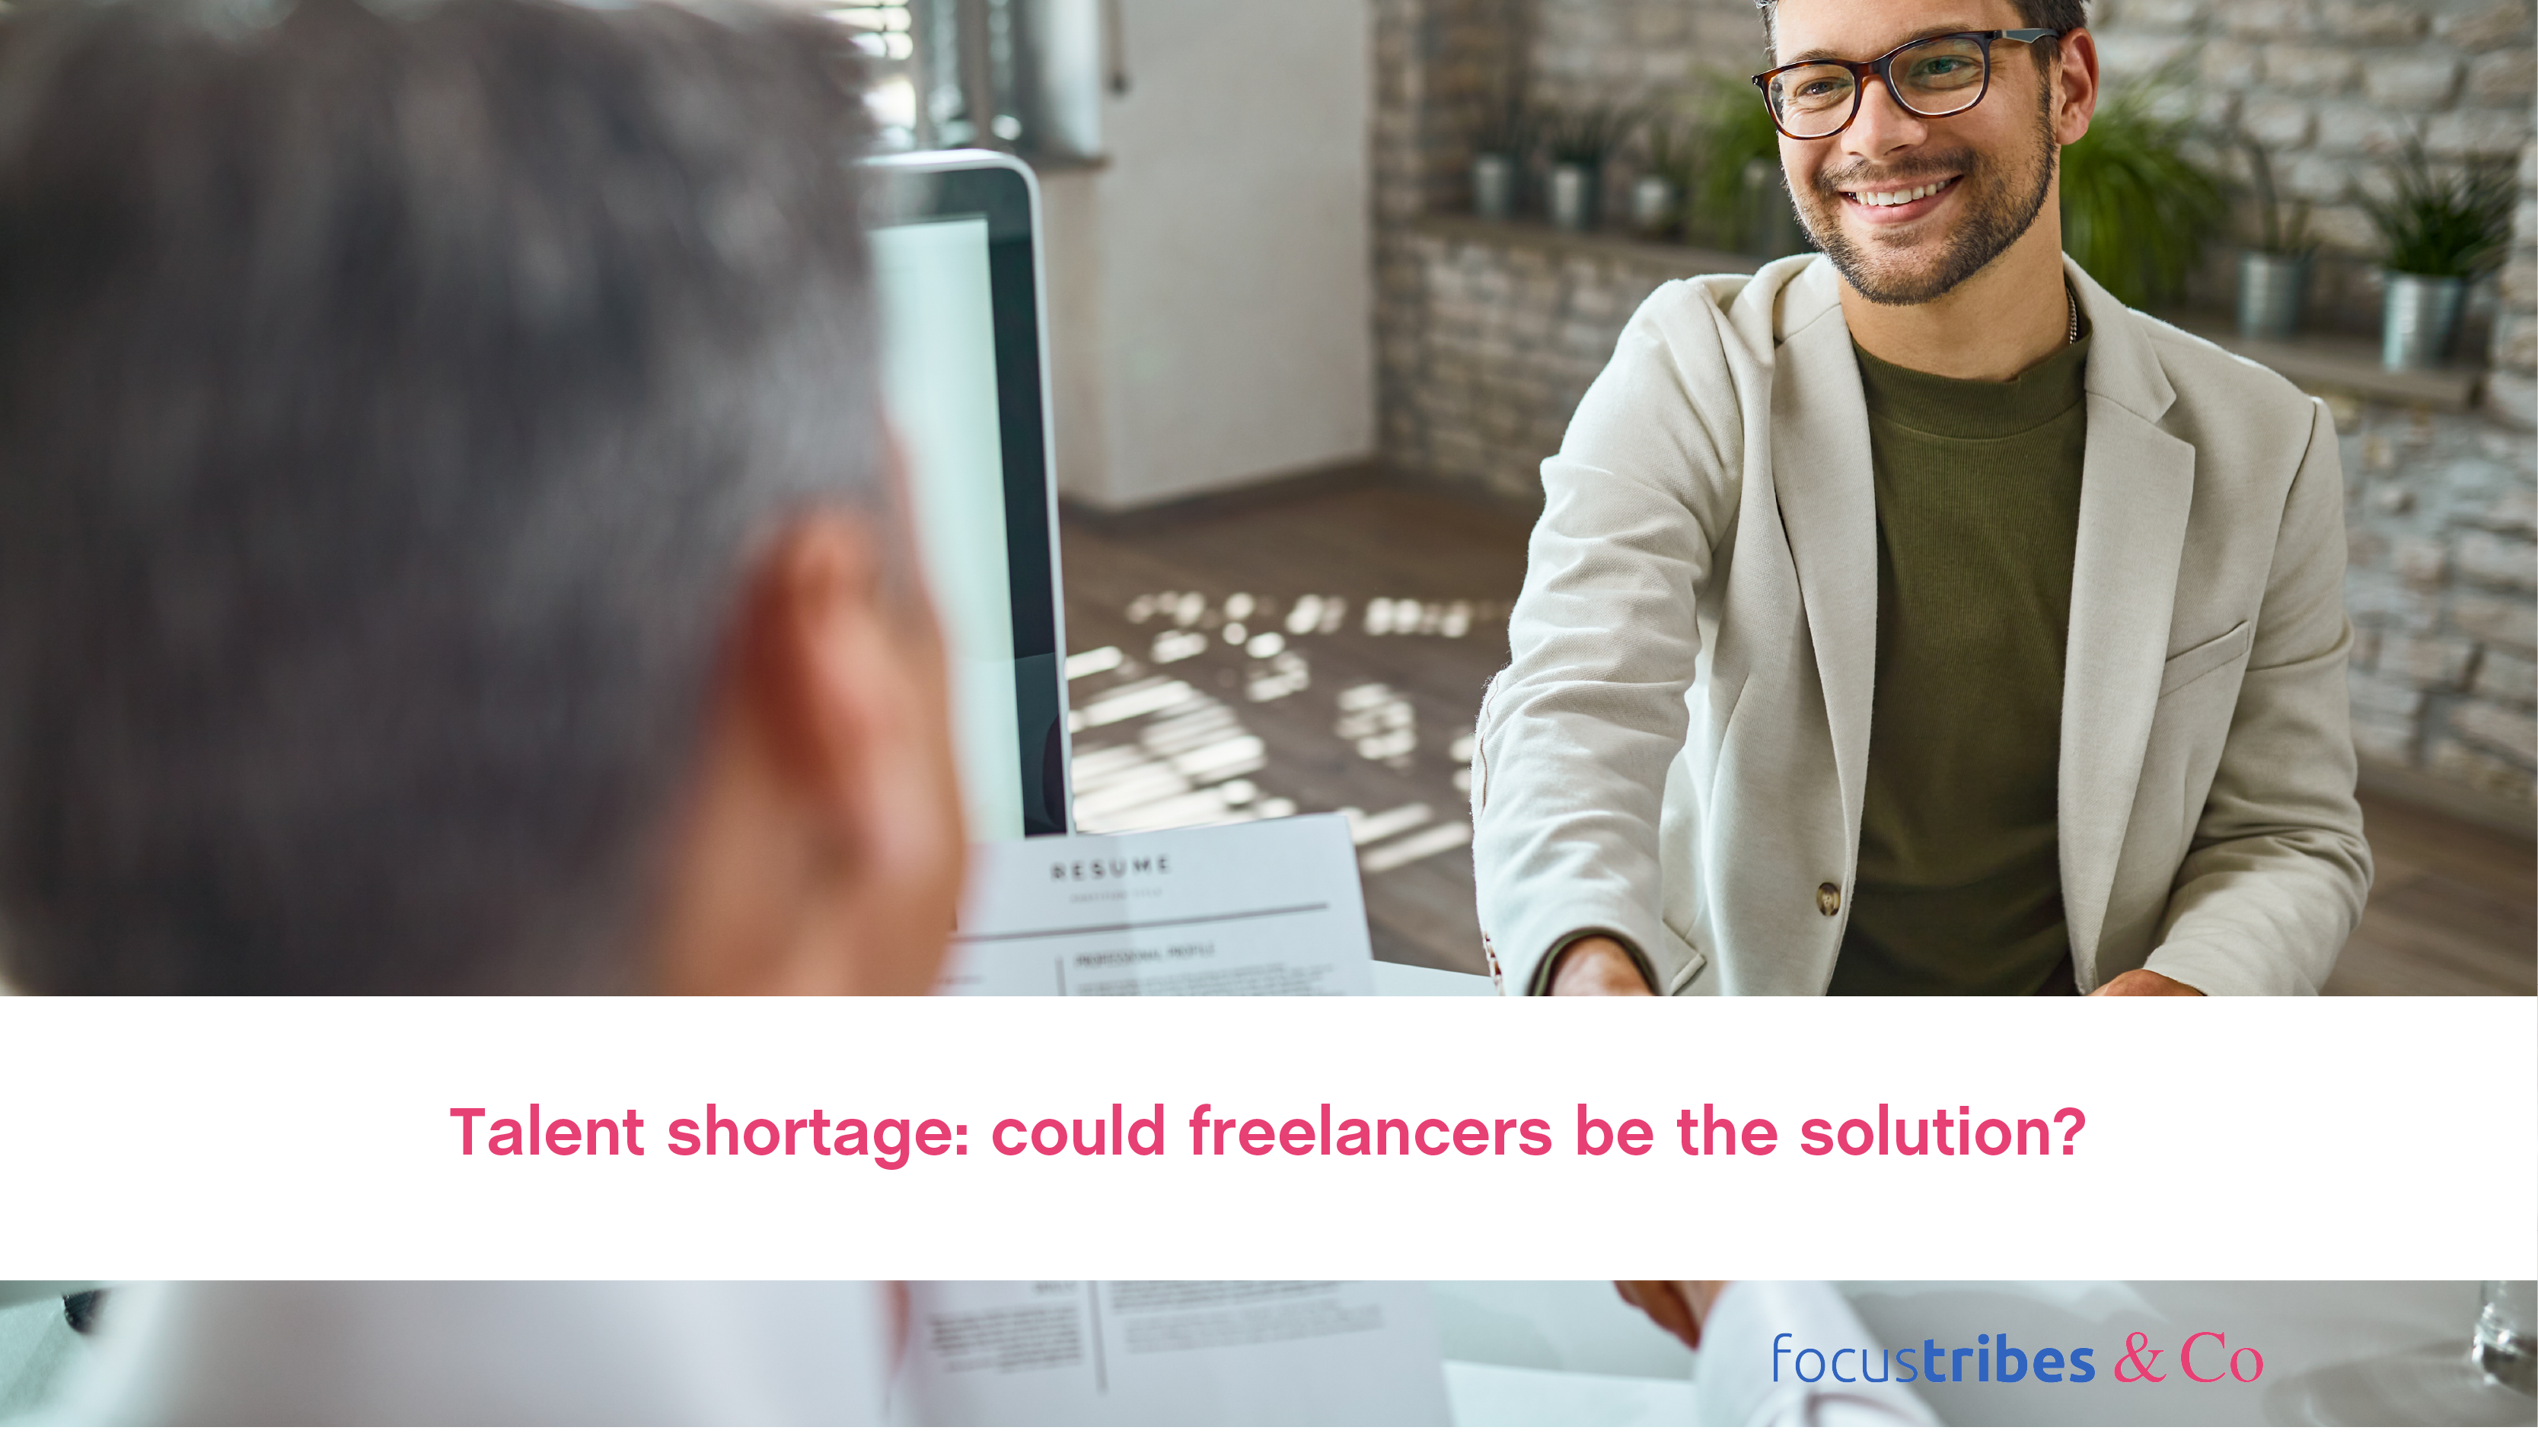 Talent shortage: could freelancers be the solution?